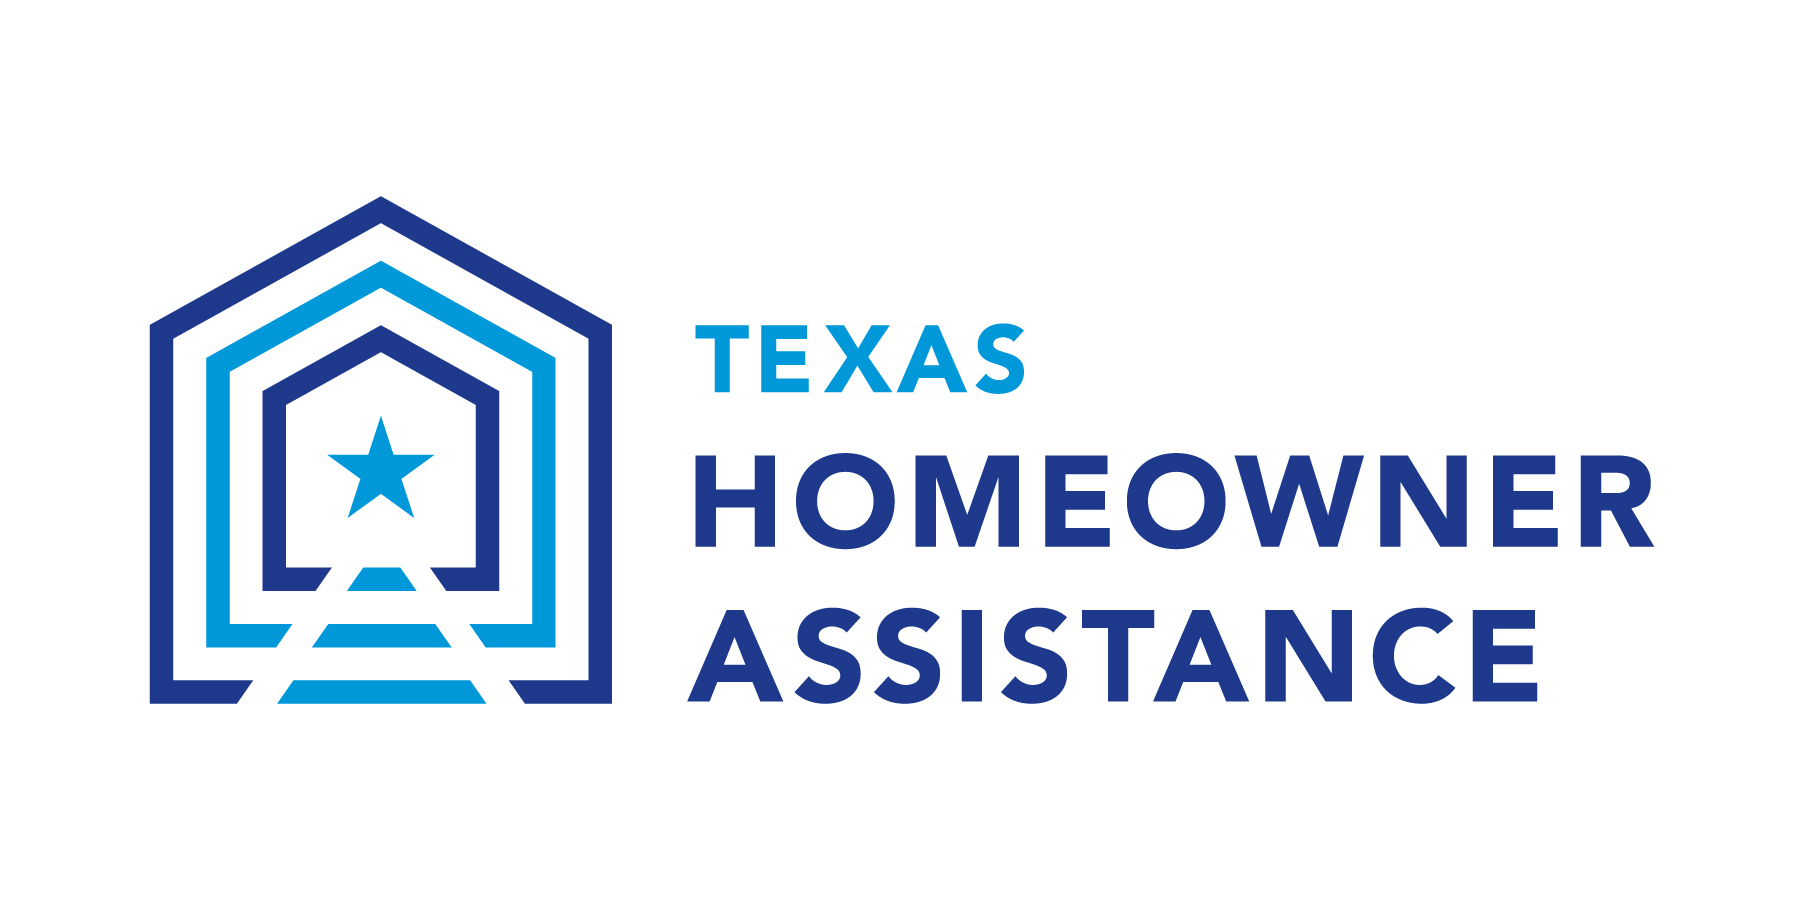 Texas Homeowner Assistance Fund